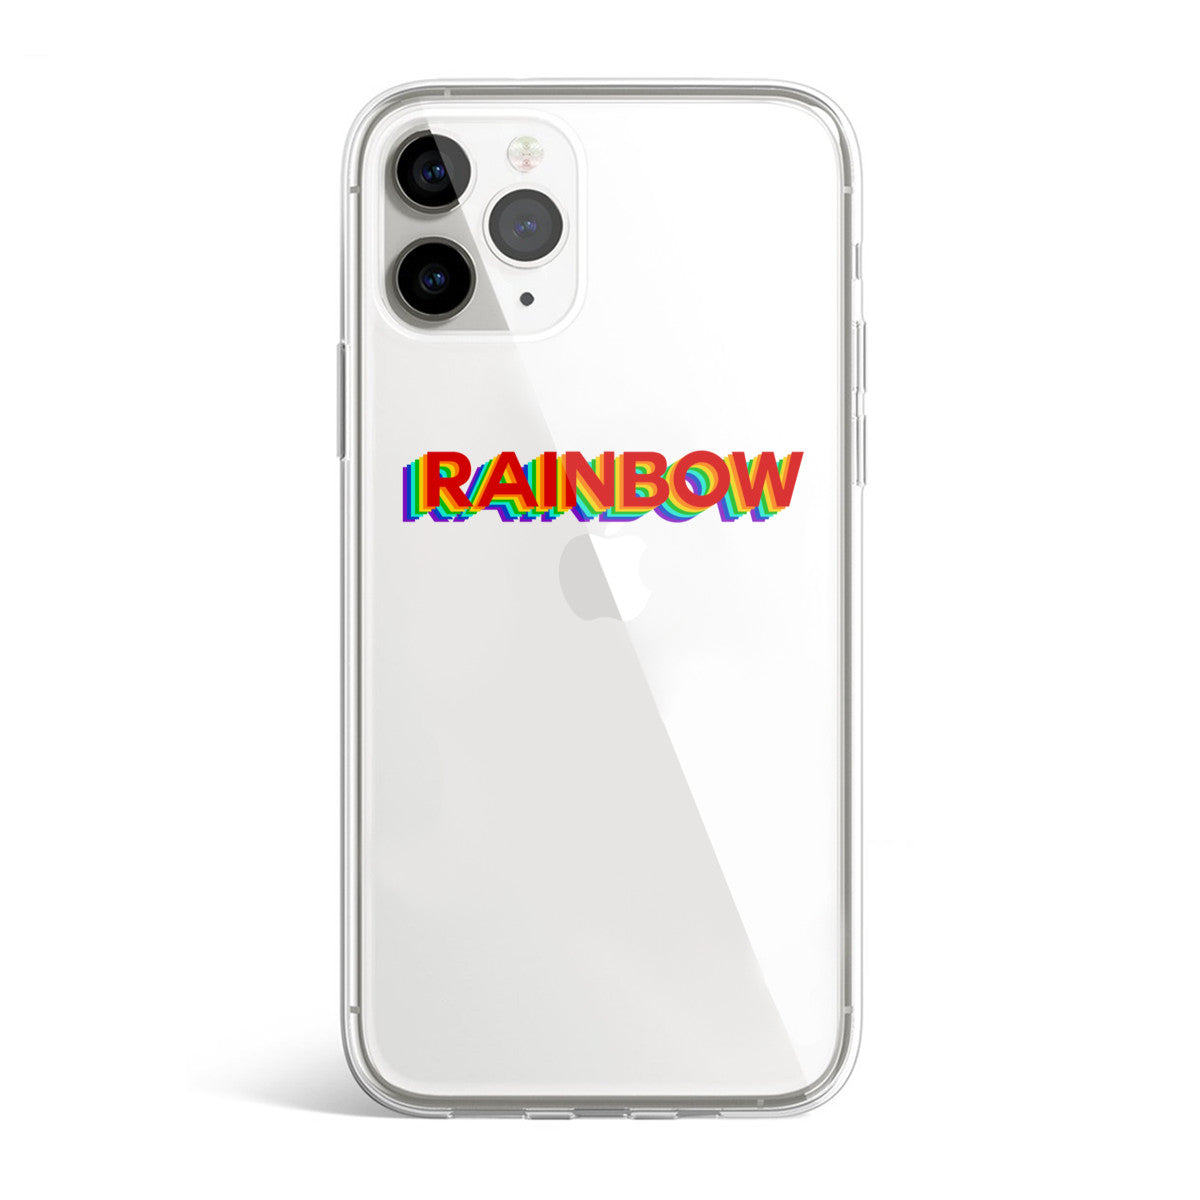 RIANBOW - iPhone Case